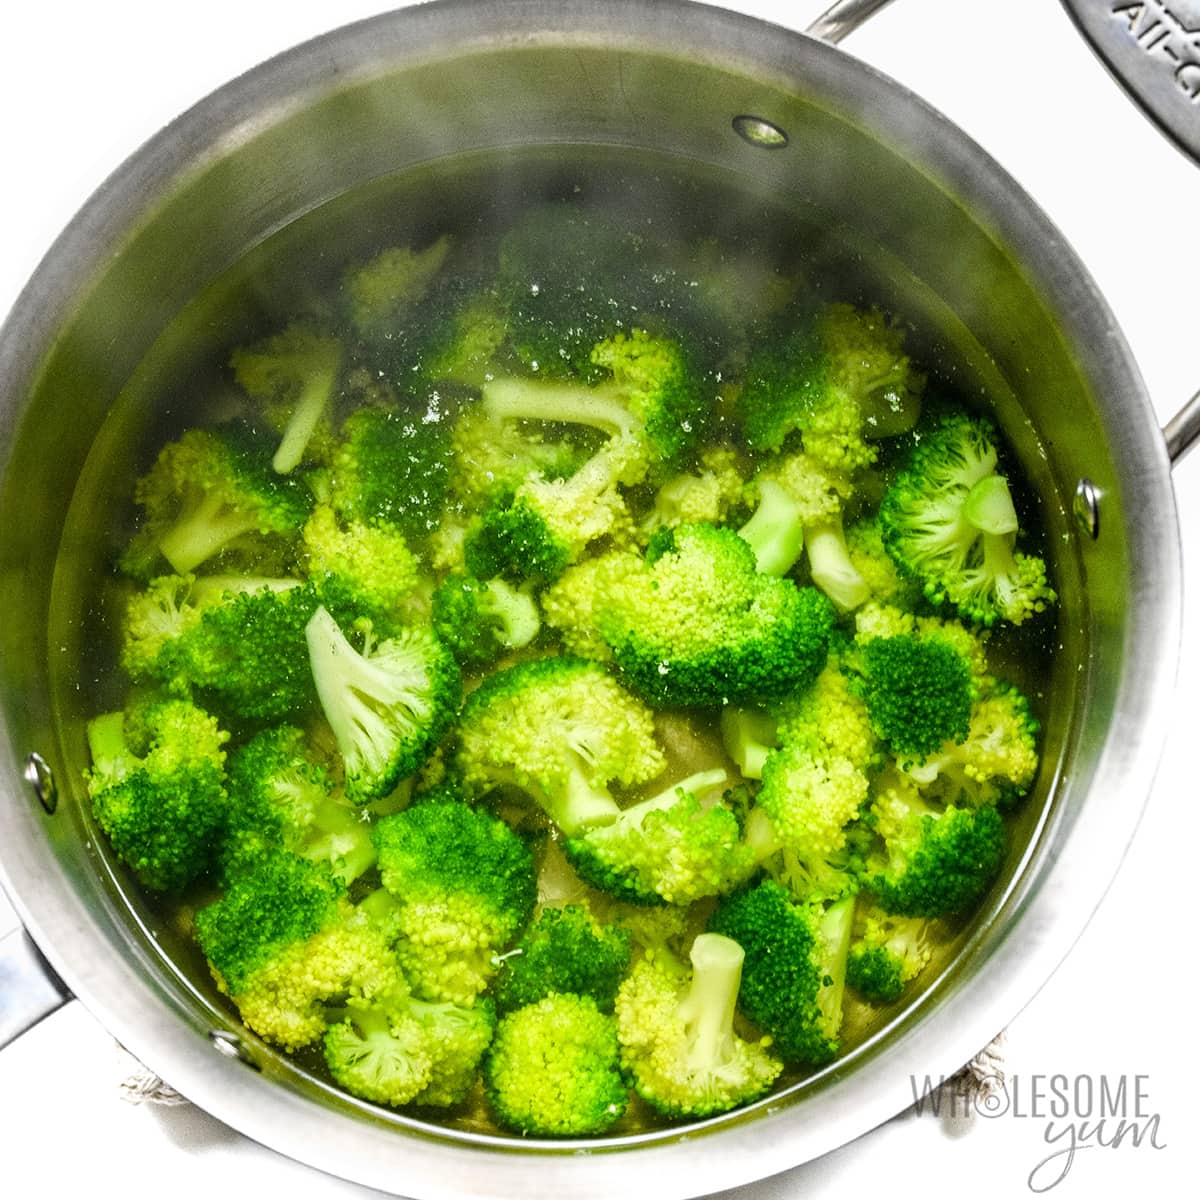 Cook the broccoli in a large pot.